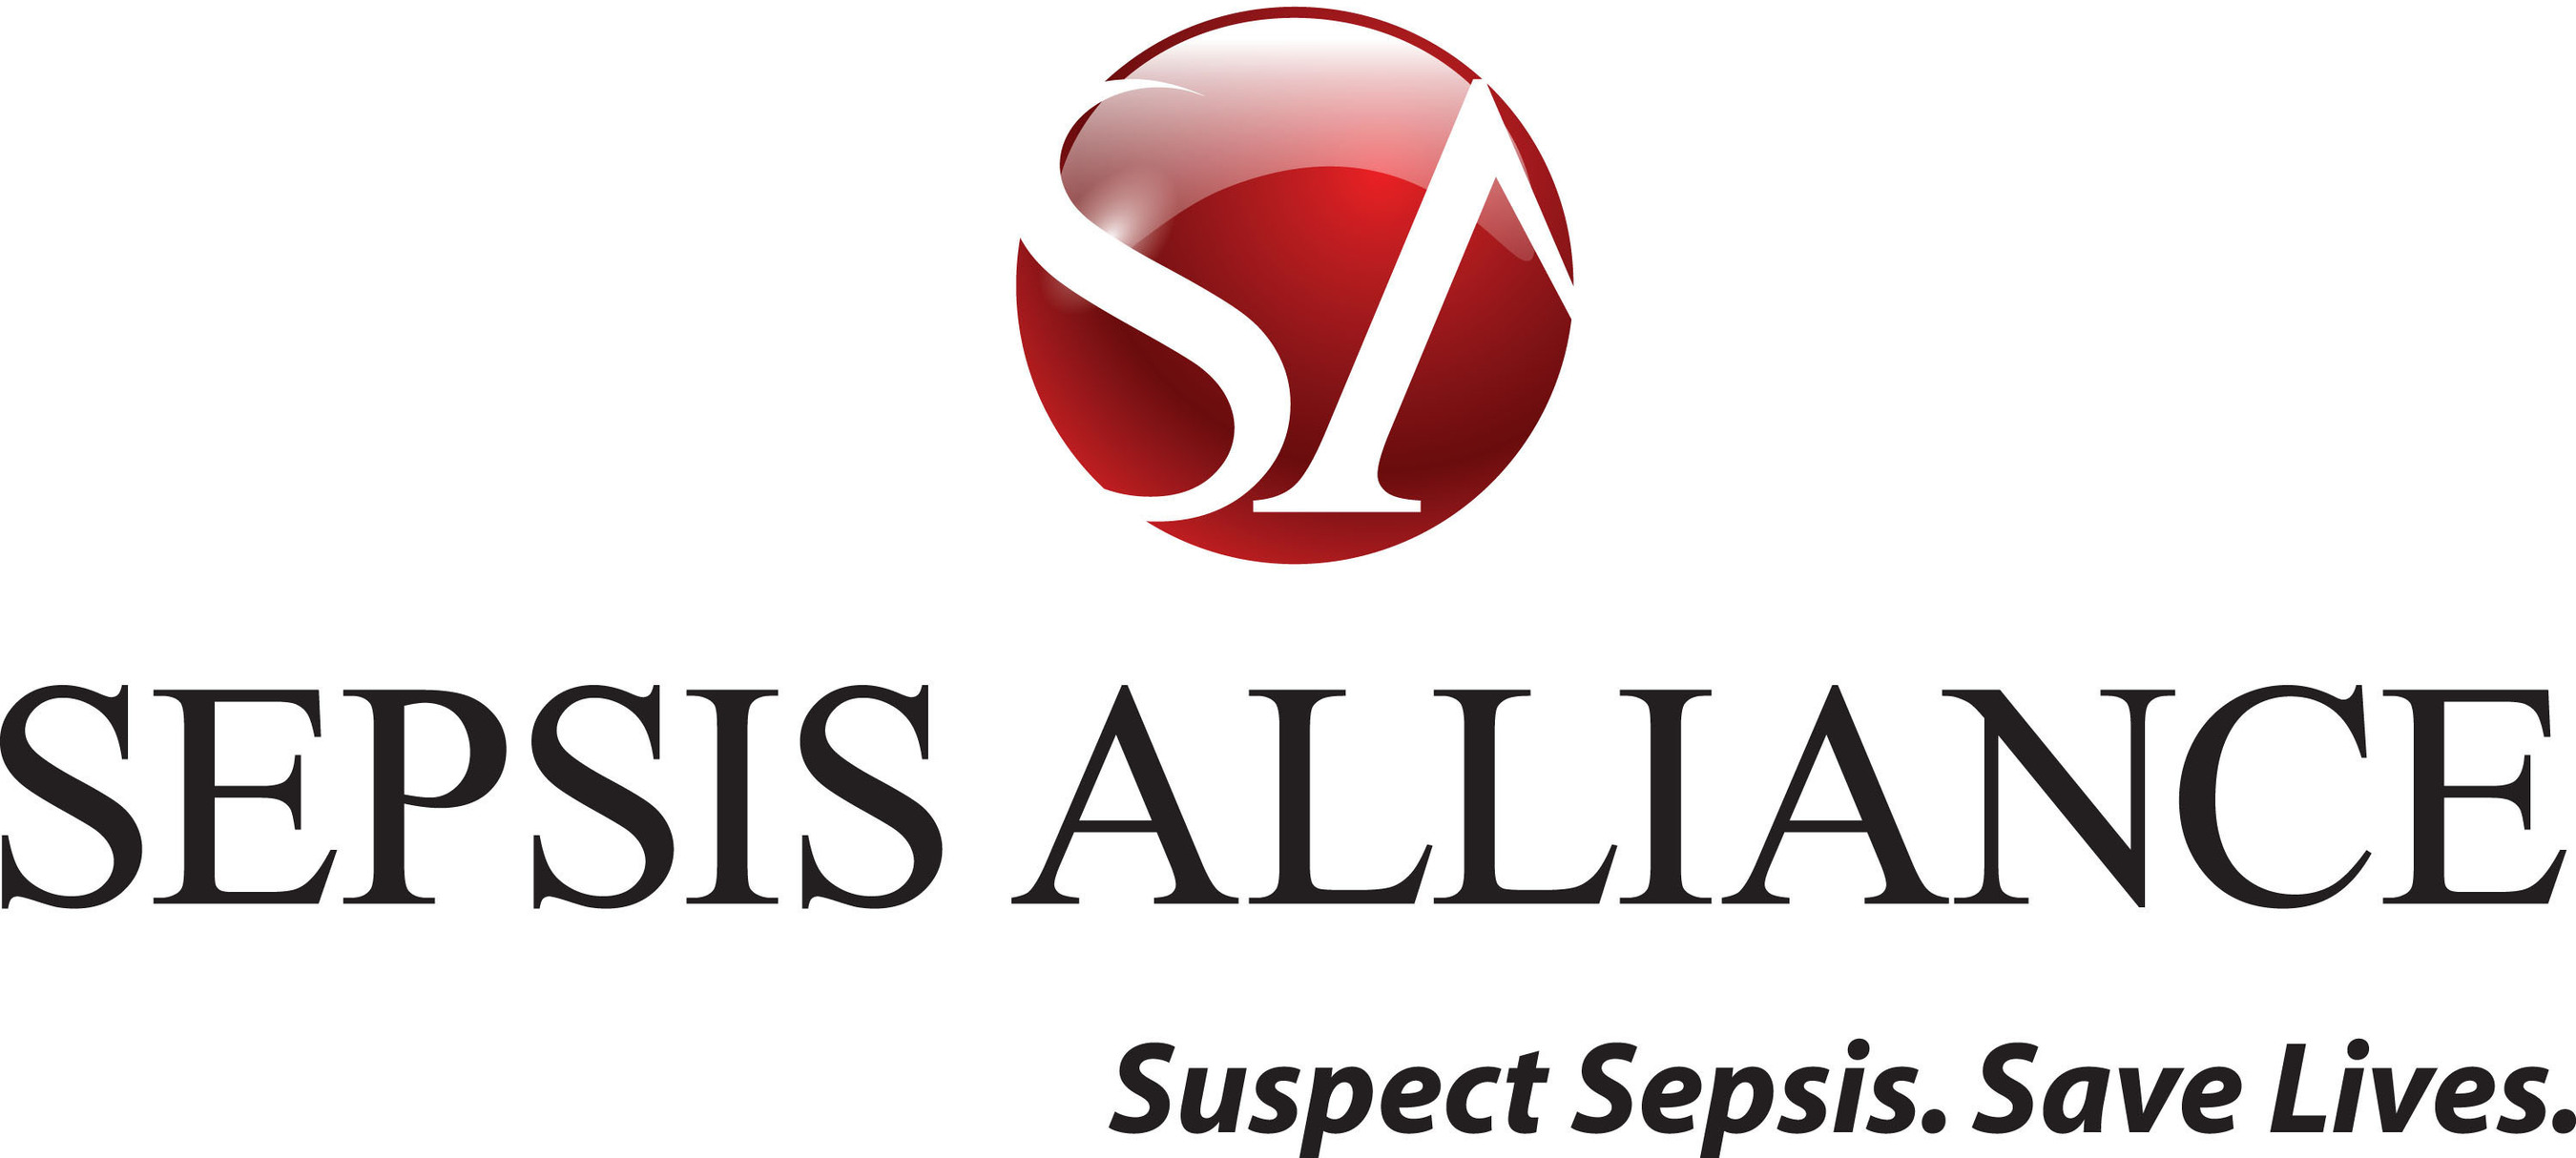 Sepsis Alliance aims to reduce morbidity and mortality by raising awareness of sepsis as a medical emergency, and providing information and support to those whose lives have been impacted by sepsis. (PRNewsFoto/Sepsis Alliance) (PRNewsFoto/SEPSIS ALLIANCE)